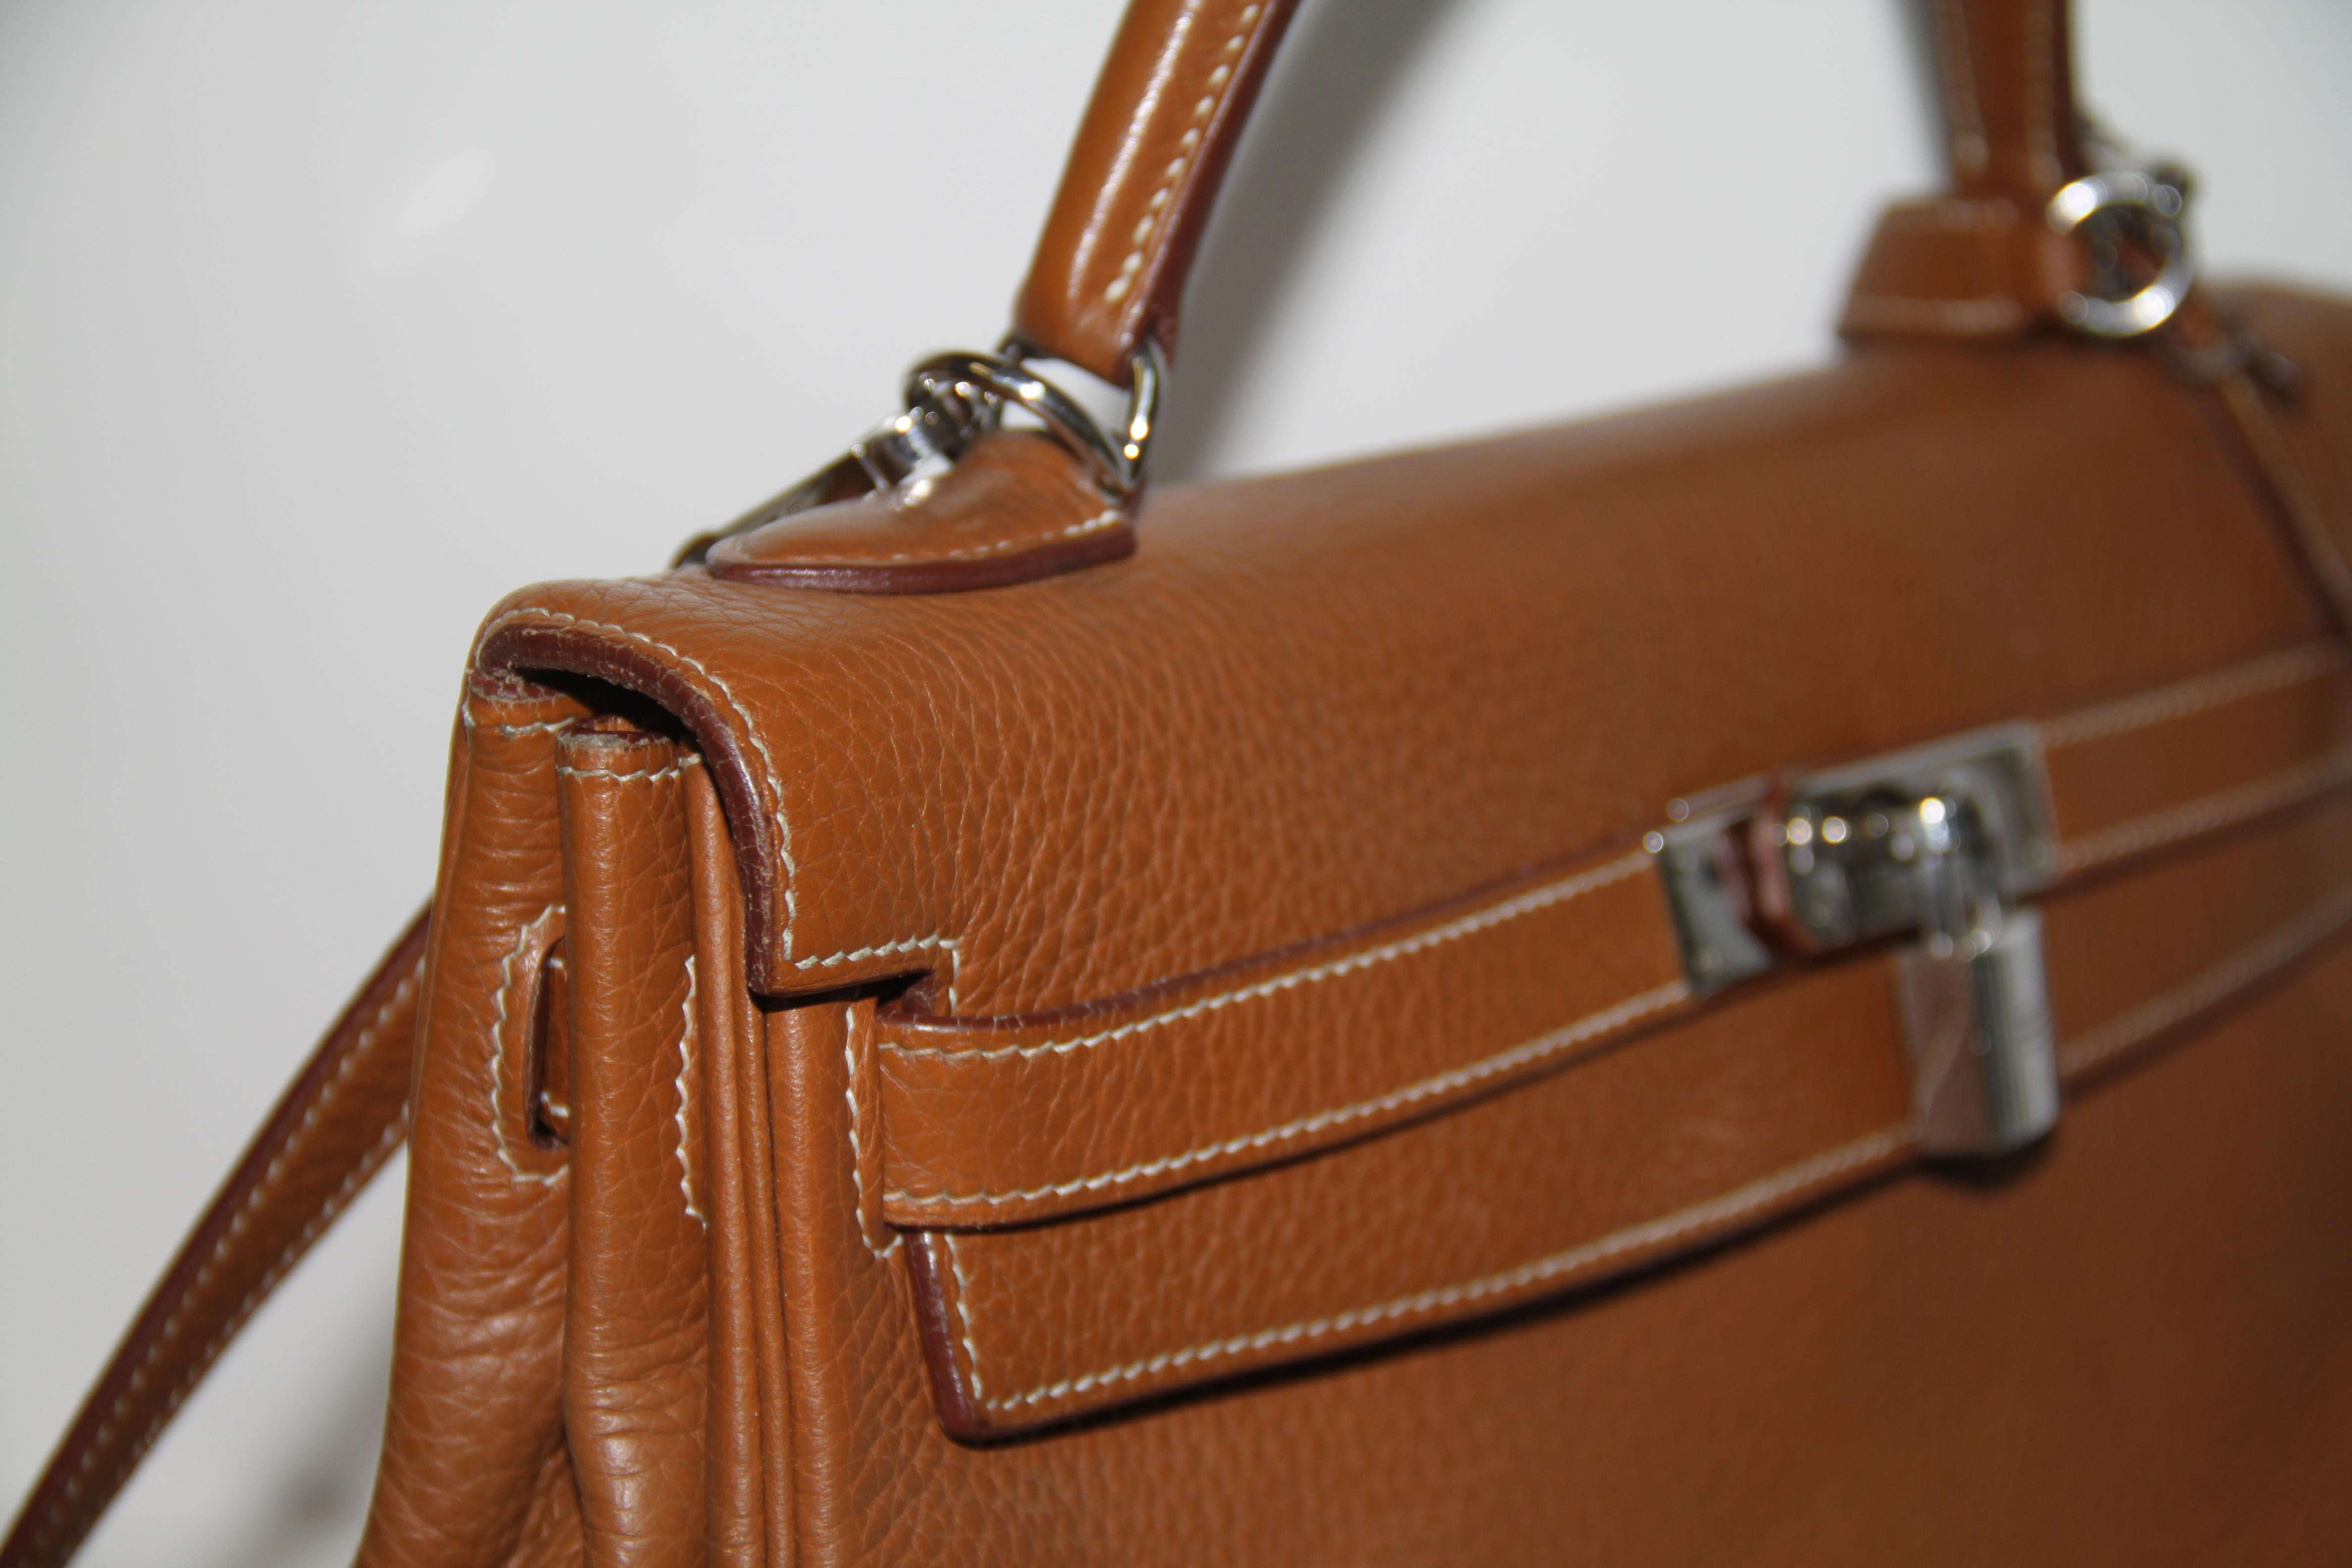 Hermes Kelly 32 Bag brown leather epsom/tan with silver Hardware Tote/Crossbody For Sale 4